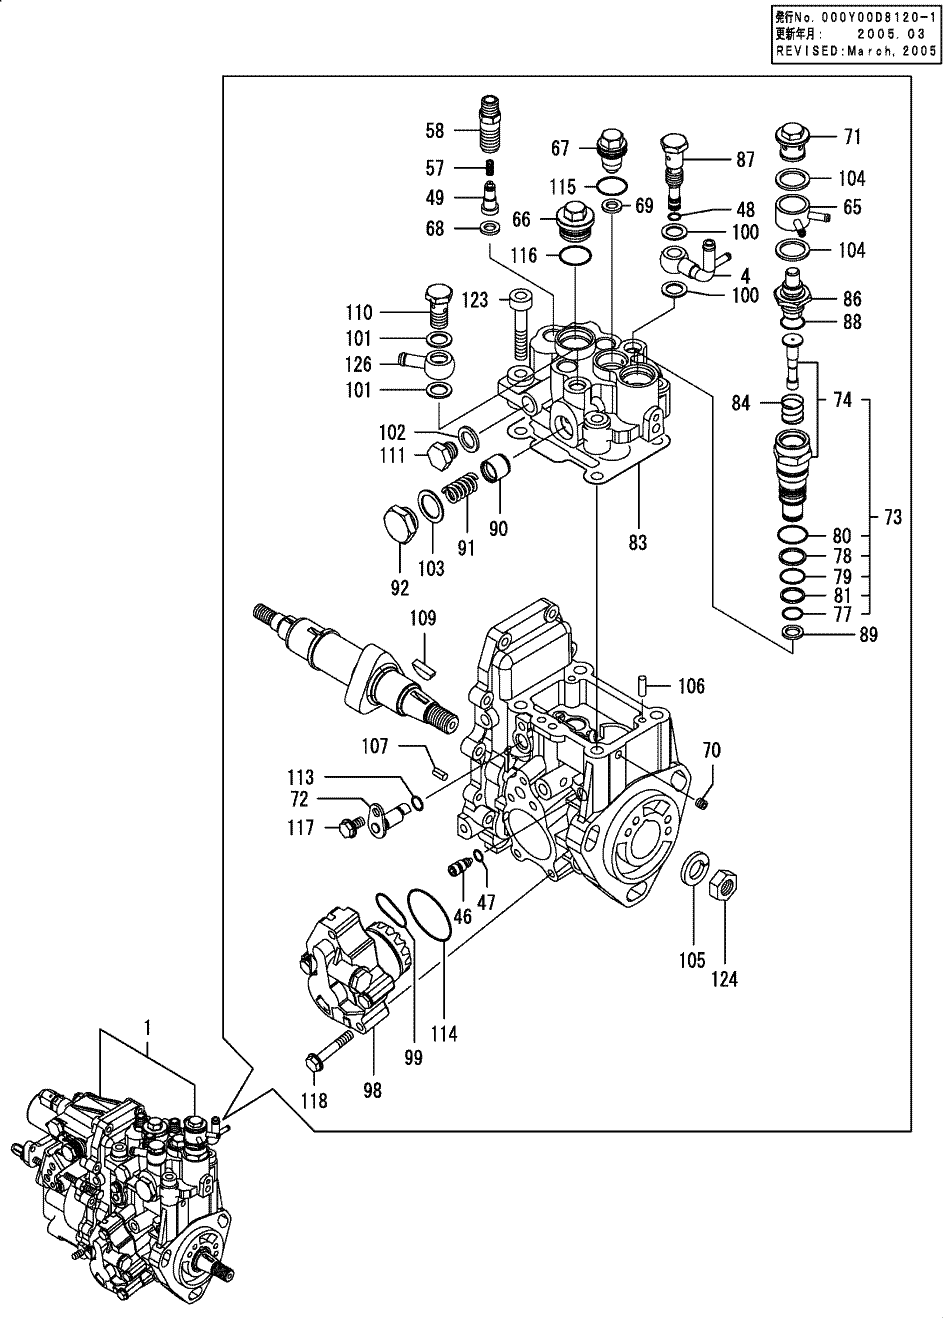 08-017 FUEL INJECTION VALVE